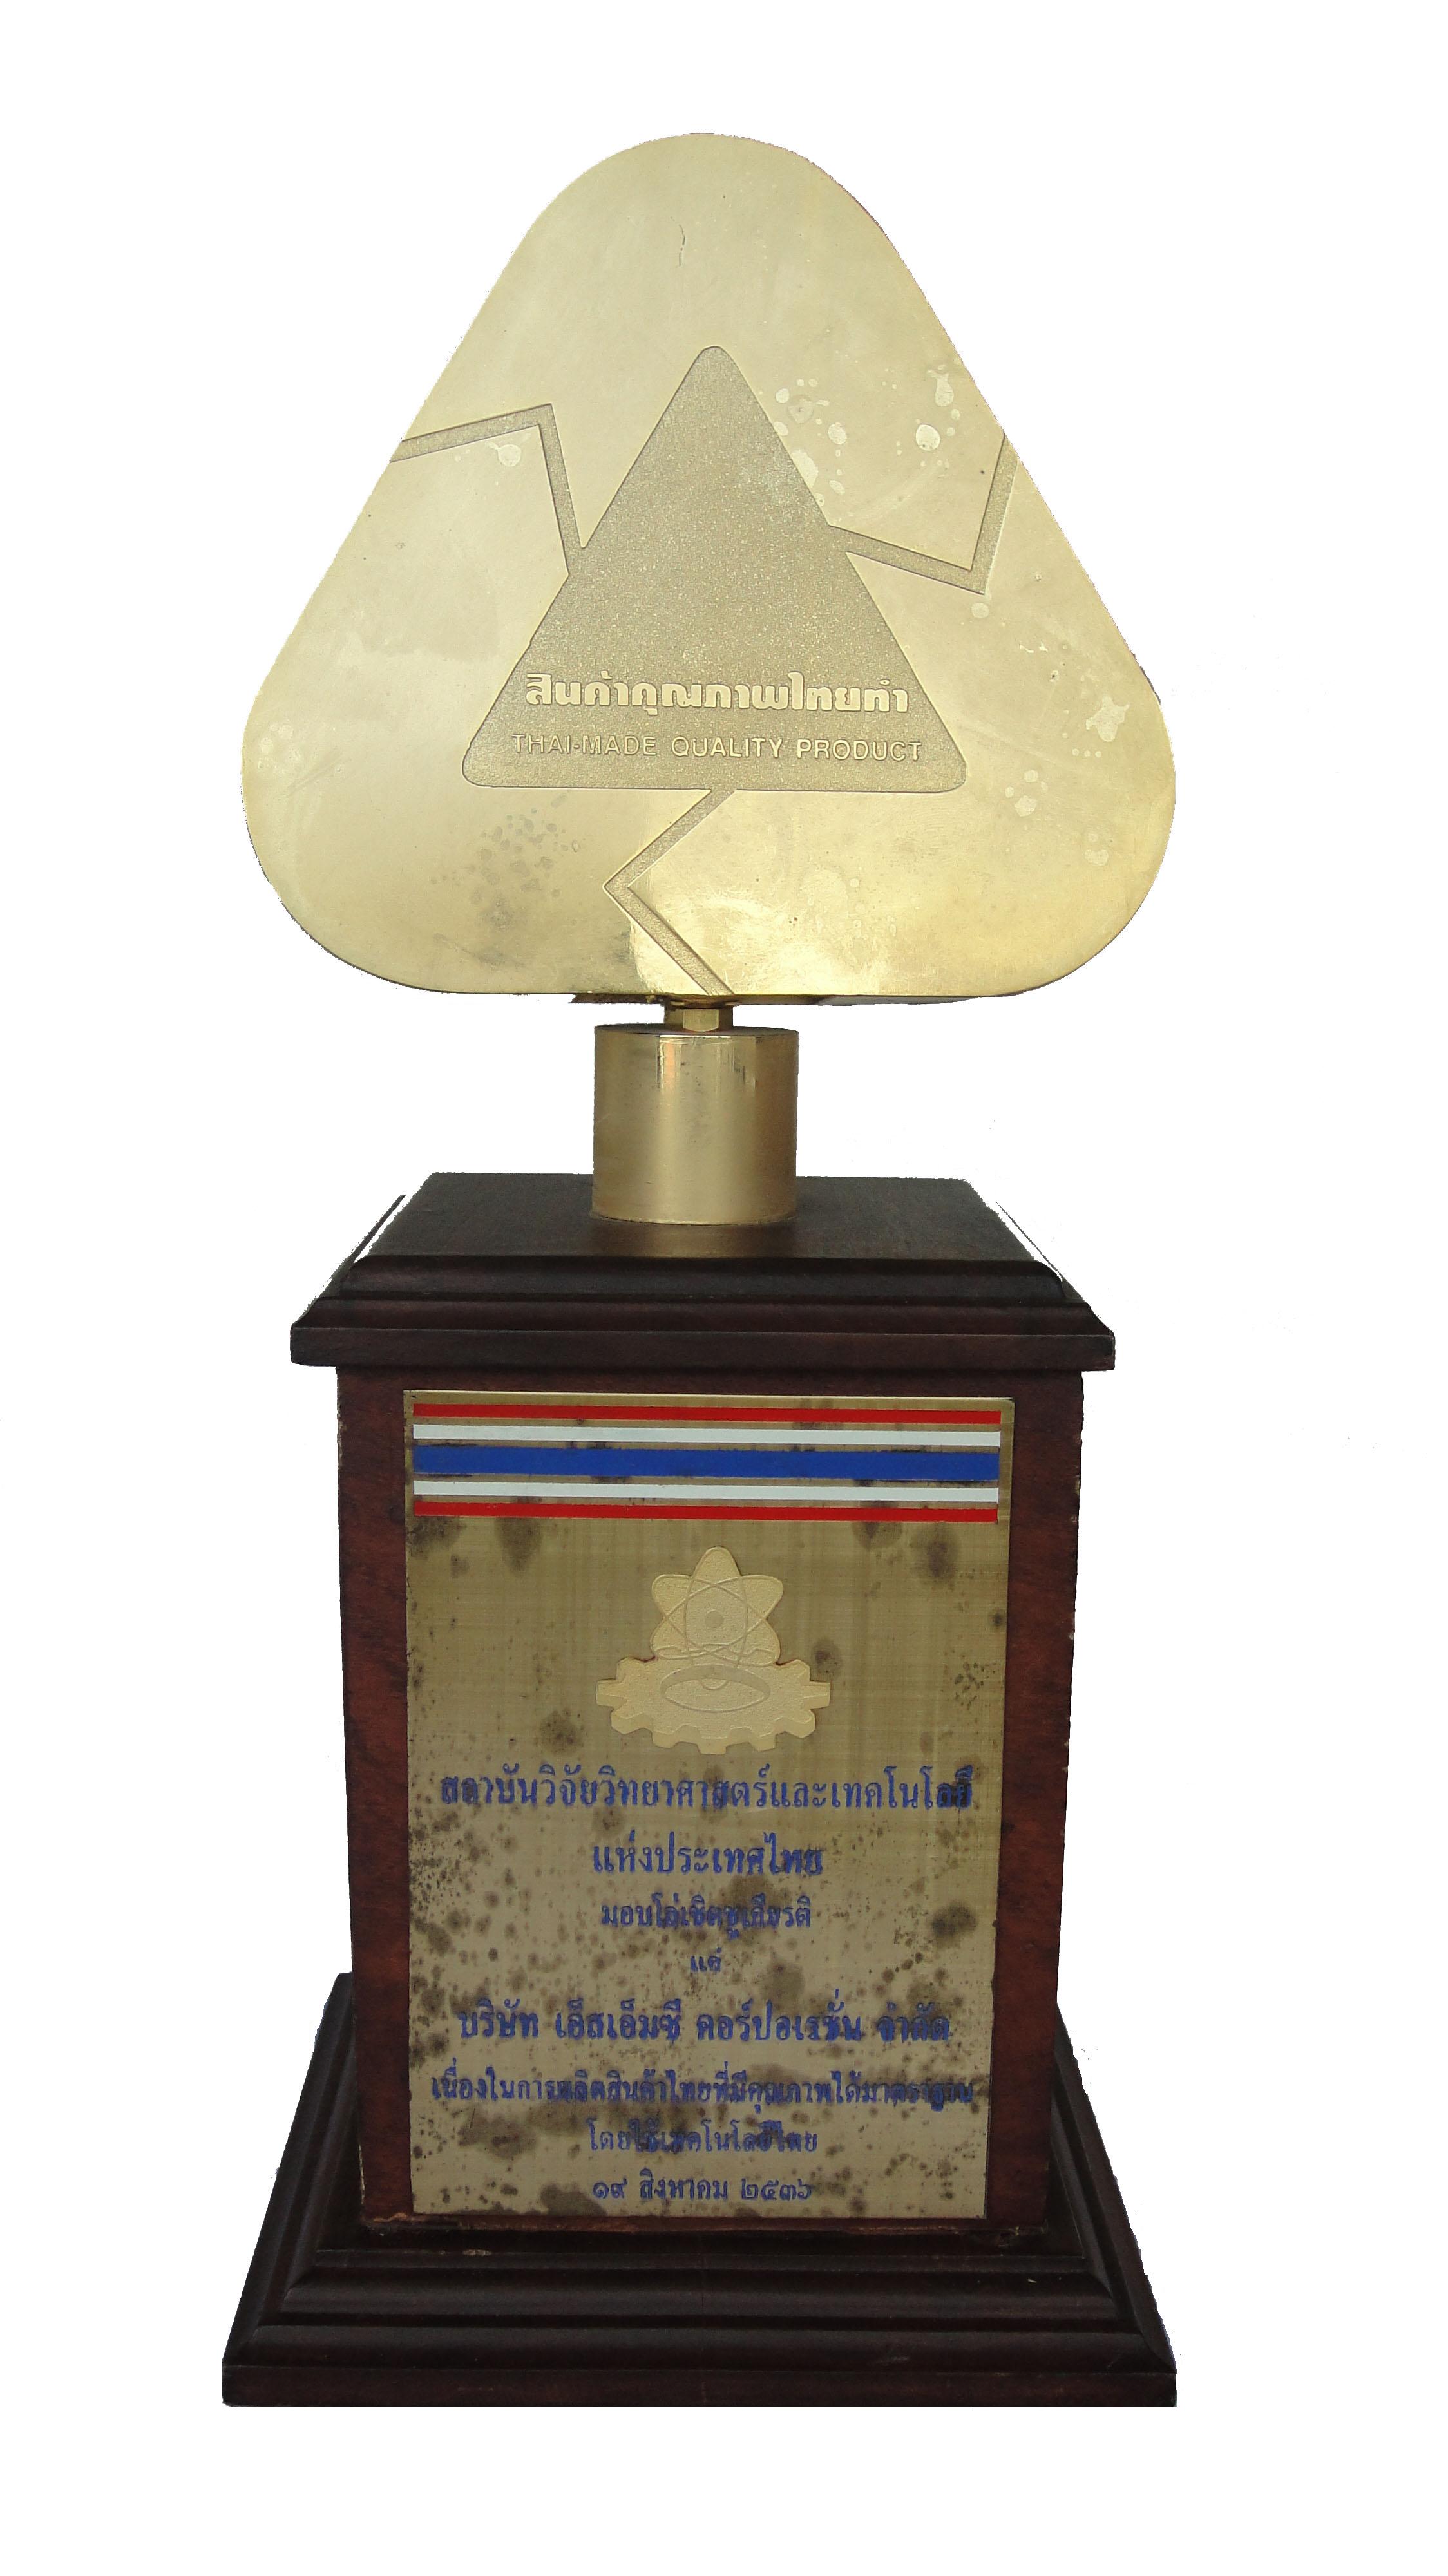 Thailand Quality Product Awards 1993 